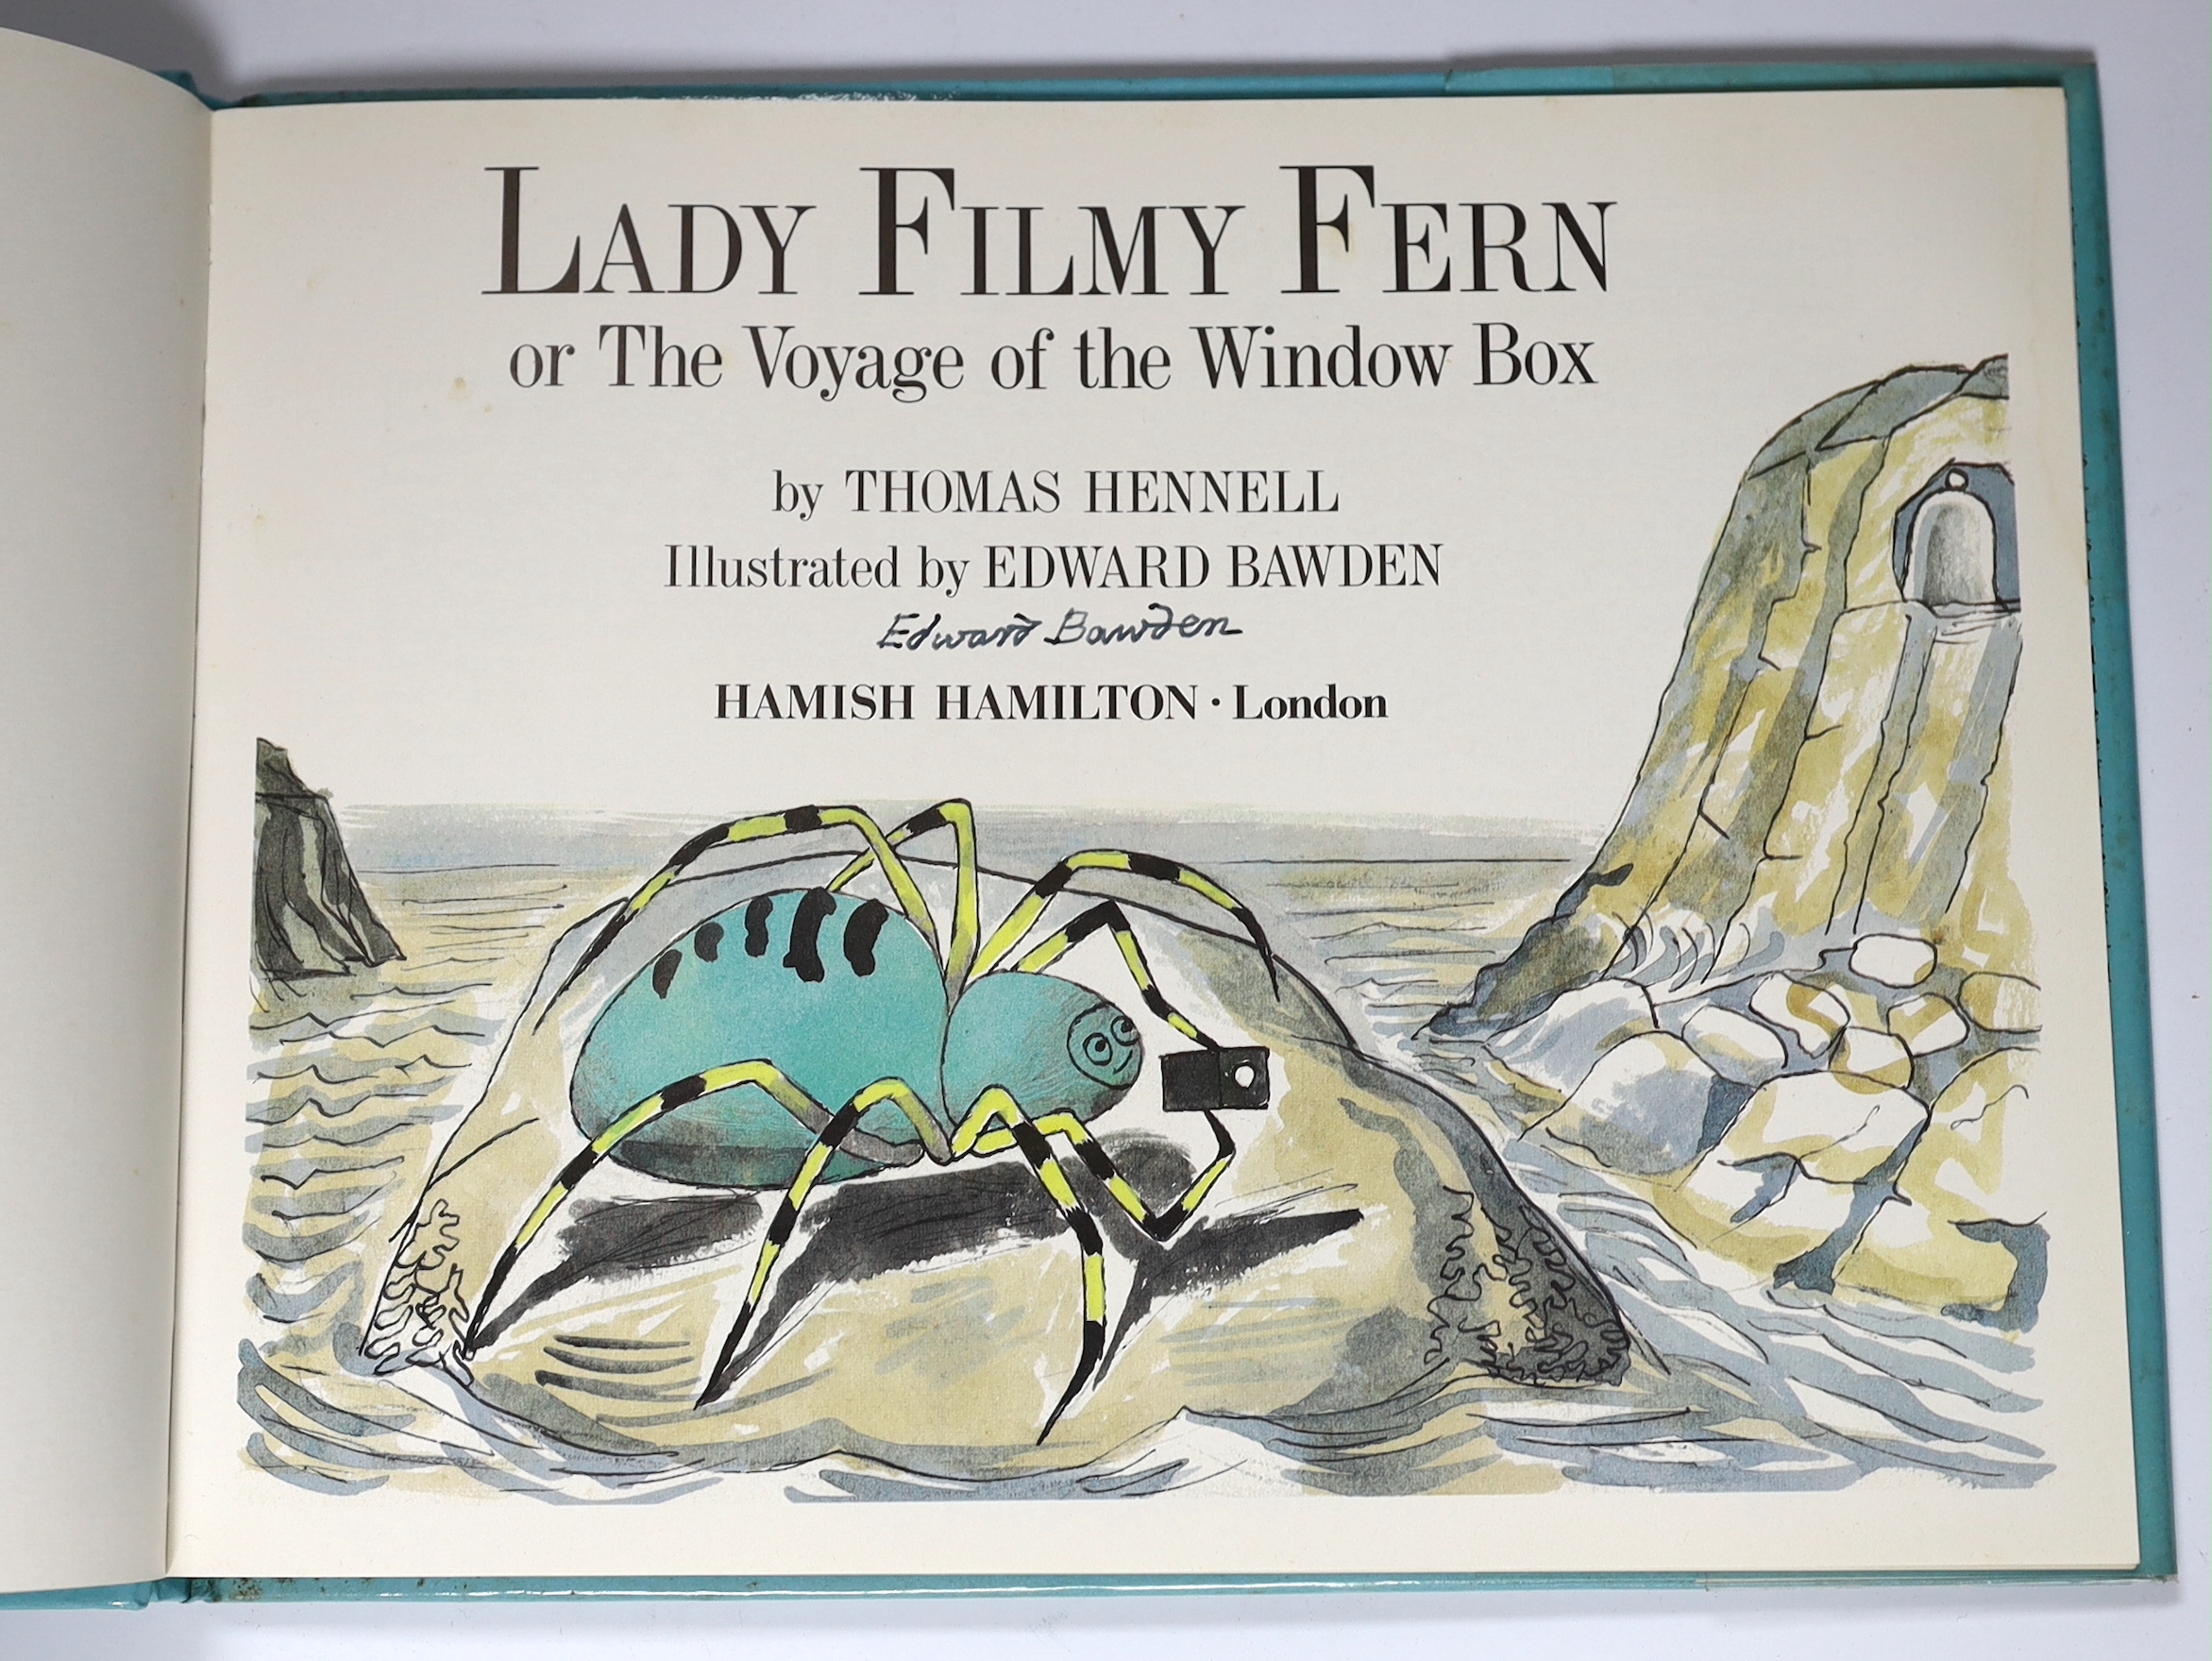 Bawden, Edward (illustrator) - Hennell, Thomas - Lady Filmy Fern, or The Voyage of the Window Box, signed on title by illustrator, original pictorial boards, with d/j, Hamish Hamilton, London, 1980, together with an unda